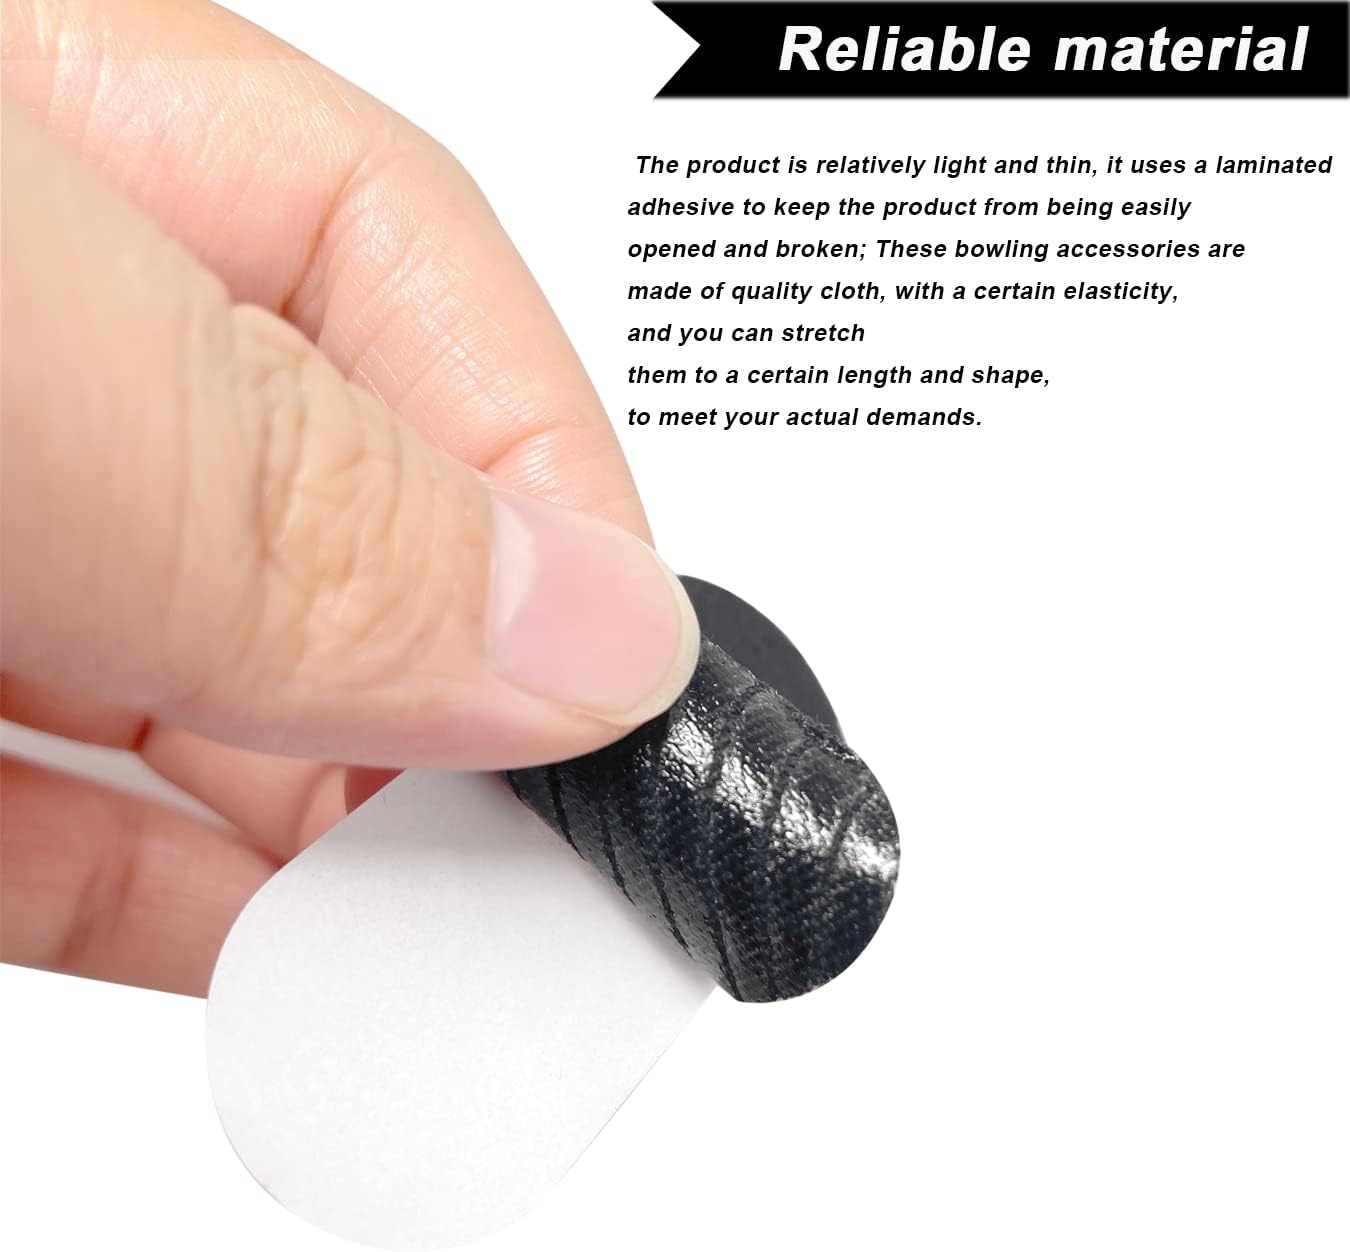 AYWFEY 100 Pcs Bowling Thumb Tape, Black Protective Bowling Tapes Elastic Bowling Ball Thumb Strips for Bowlers Exercise Sport Bowling Accessories, Perfect for Women Men Children